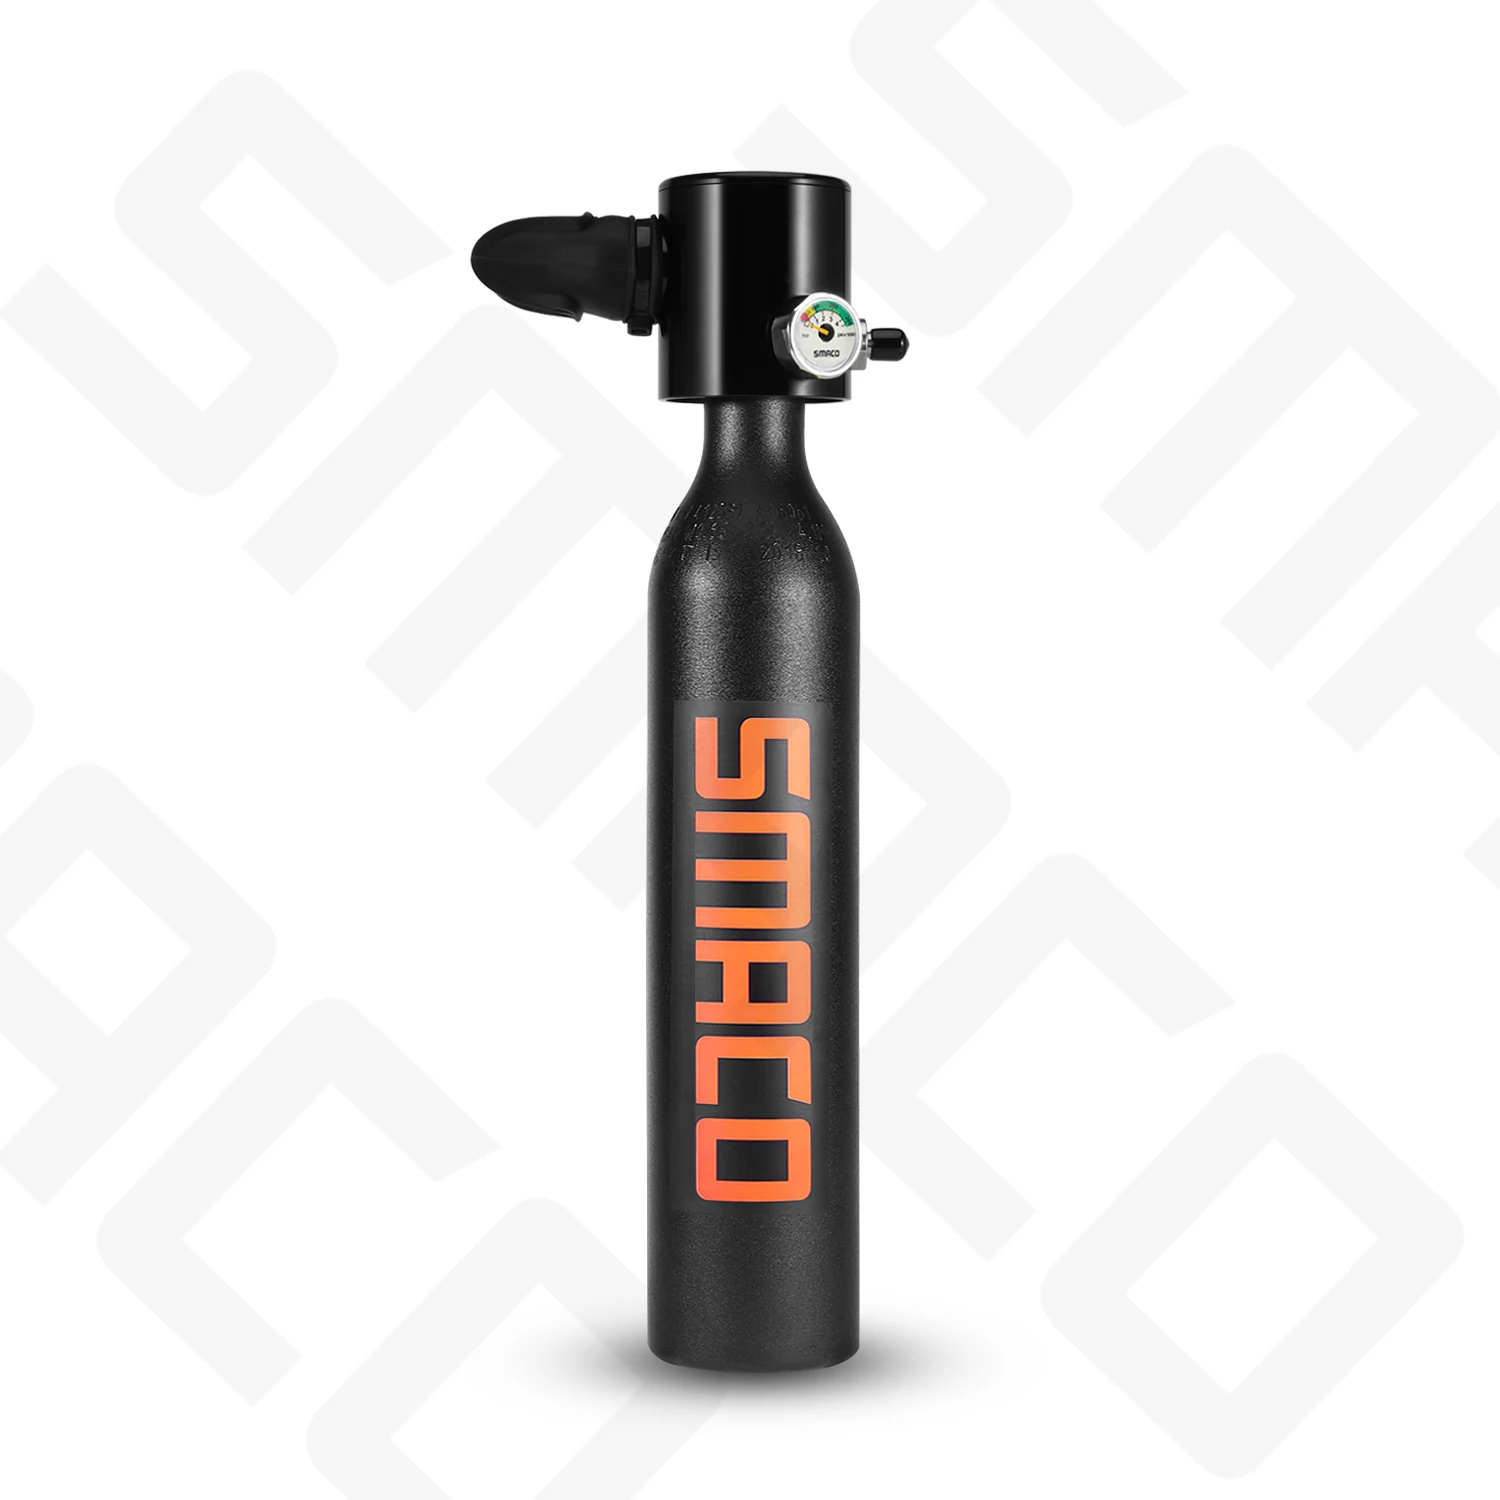 SMACO Diving Equipment oxygen cylinder set Mini scuba tank total freedom breath underwater for 5 a 10 minutos